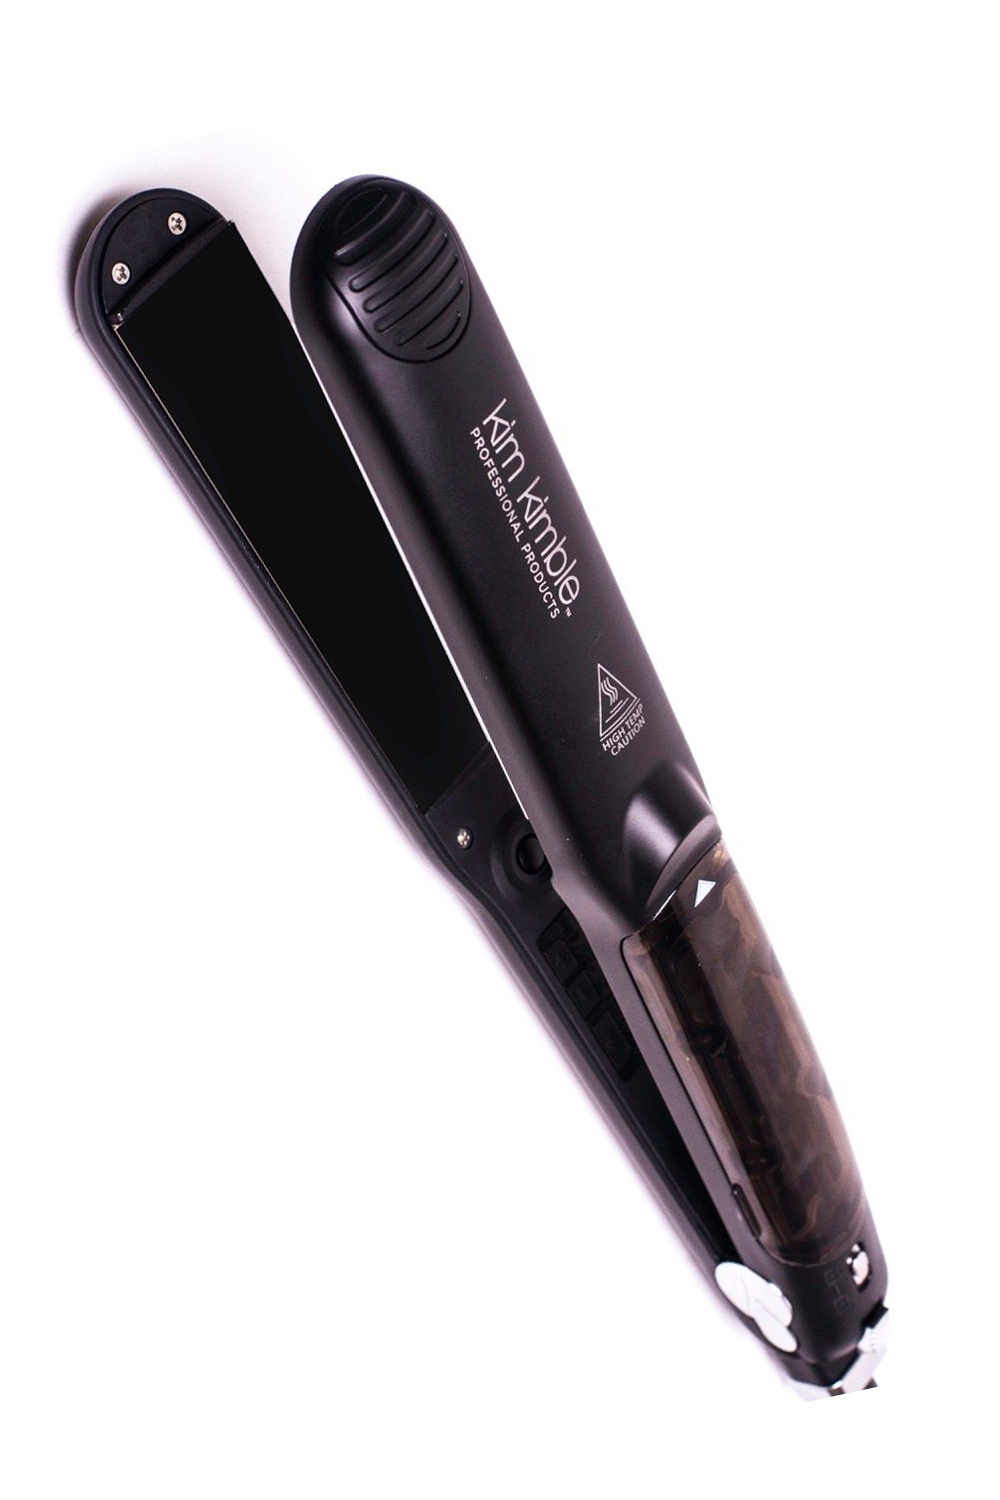 The 7 Best Hair Straighteners for Thick Hair - Reviews by Your Best Digs